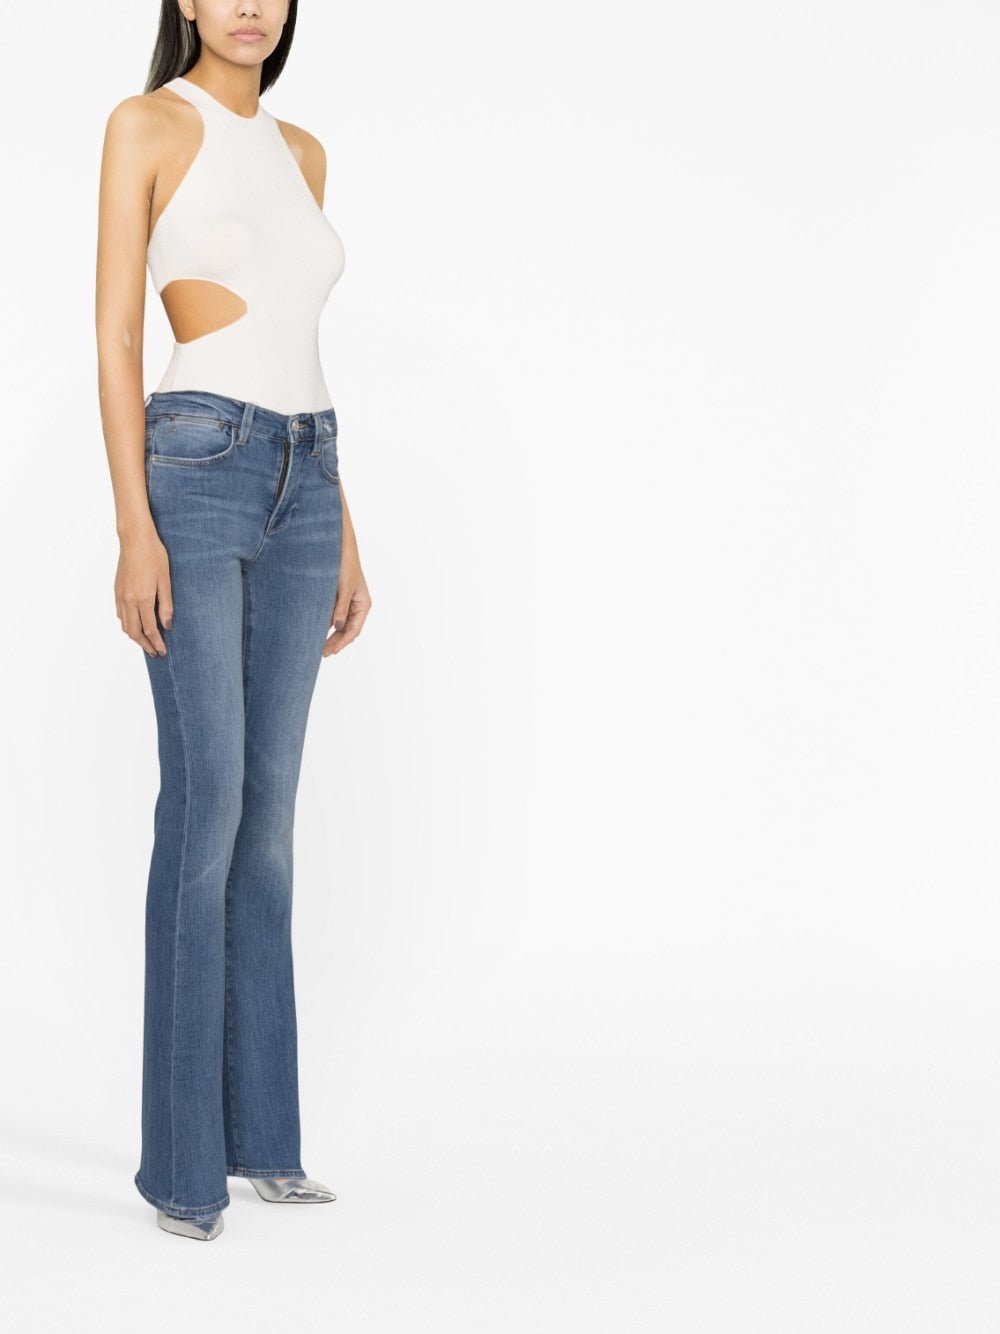 FrameLe High Flare jeans at Fashion Clinic